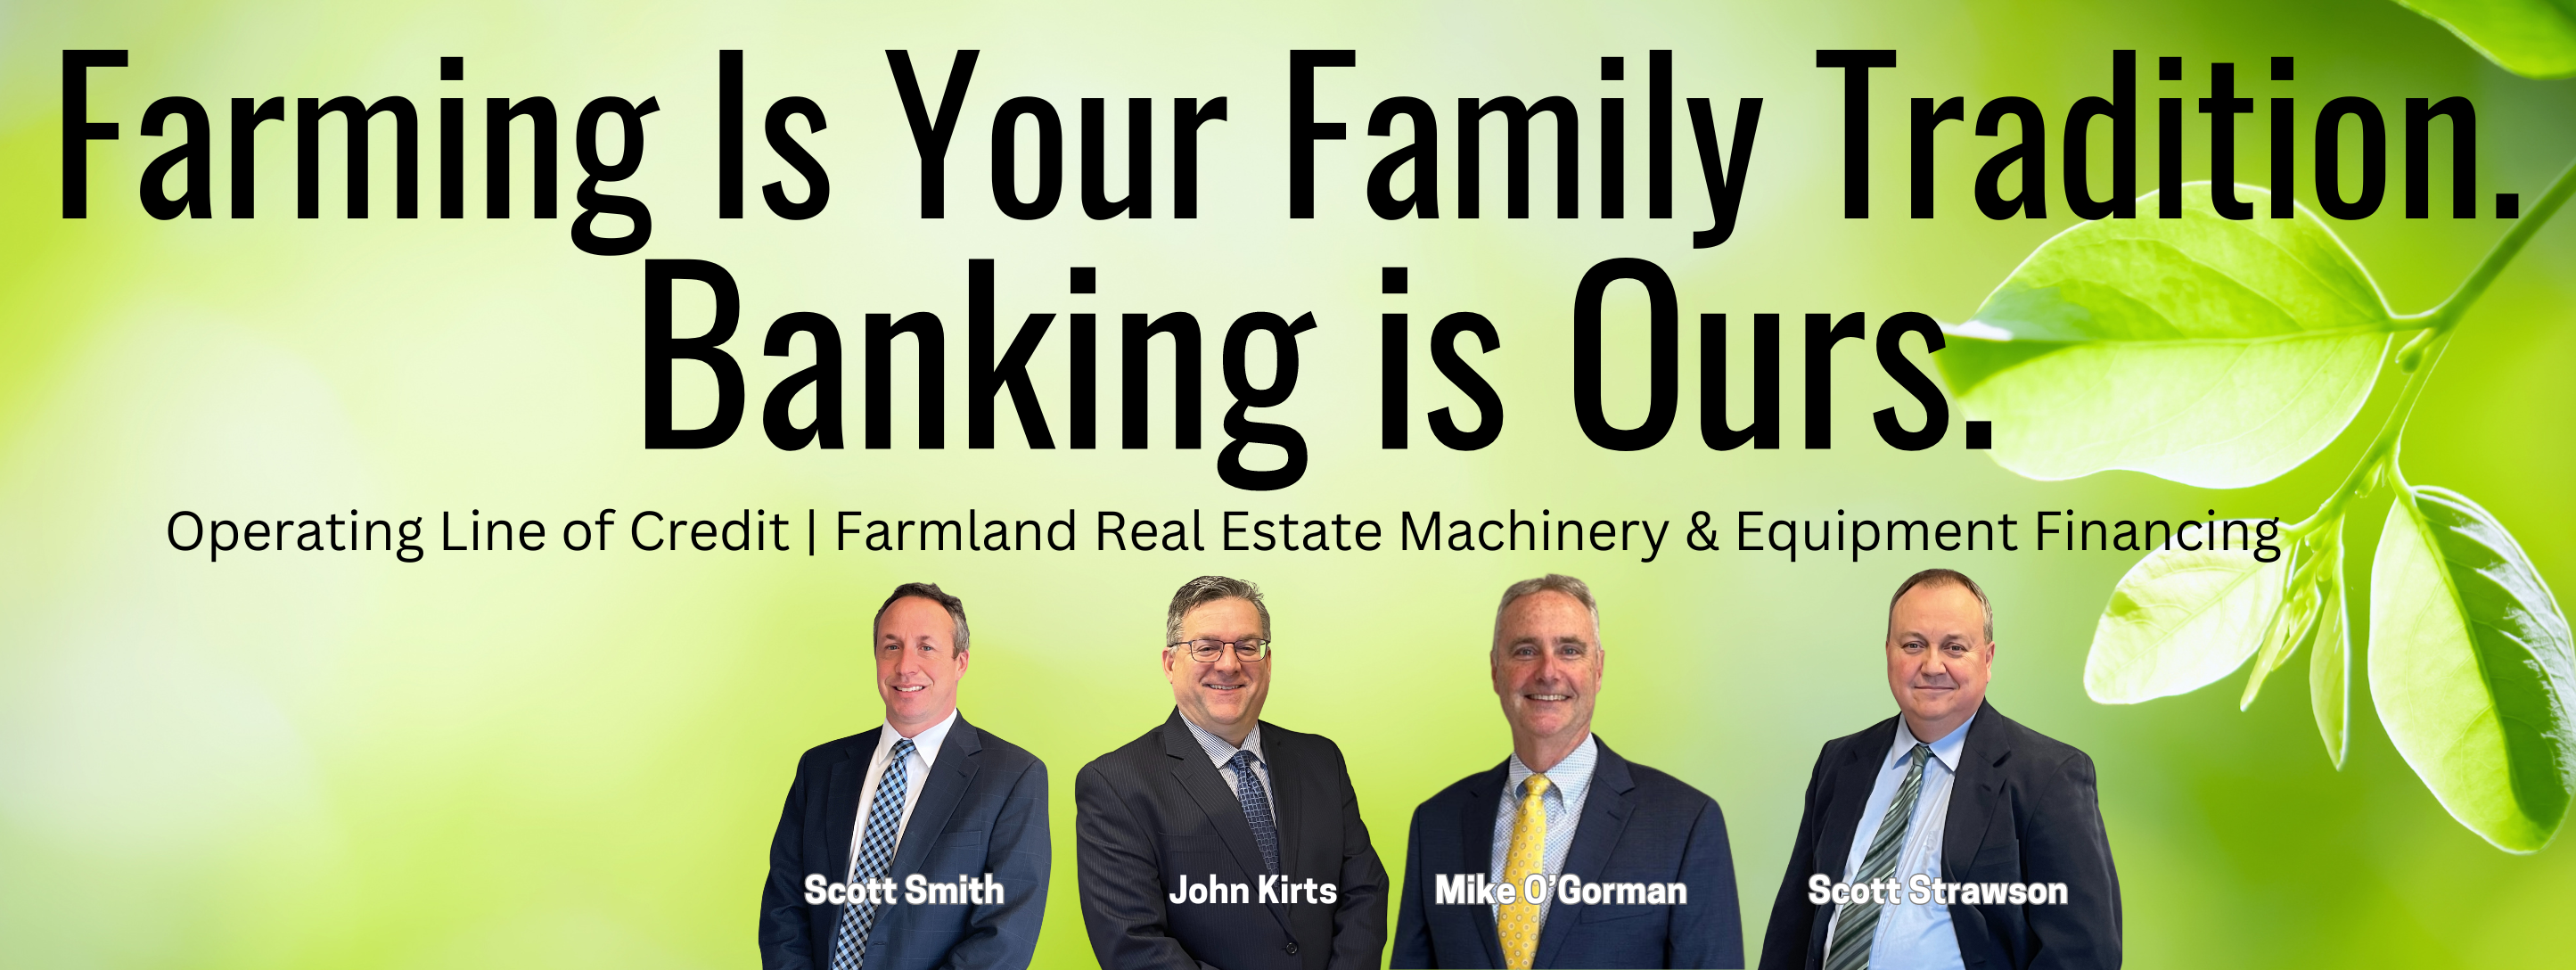 Farming is your family tradition. Banking is ours. Operating line of credit farmland real estate machinery & equipment financing